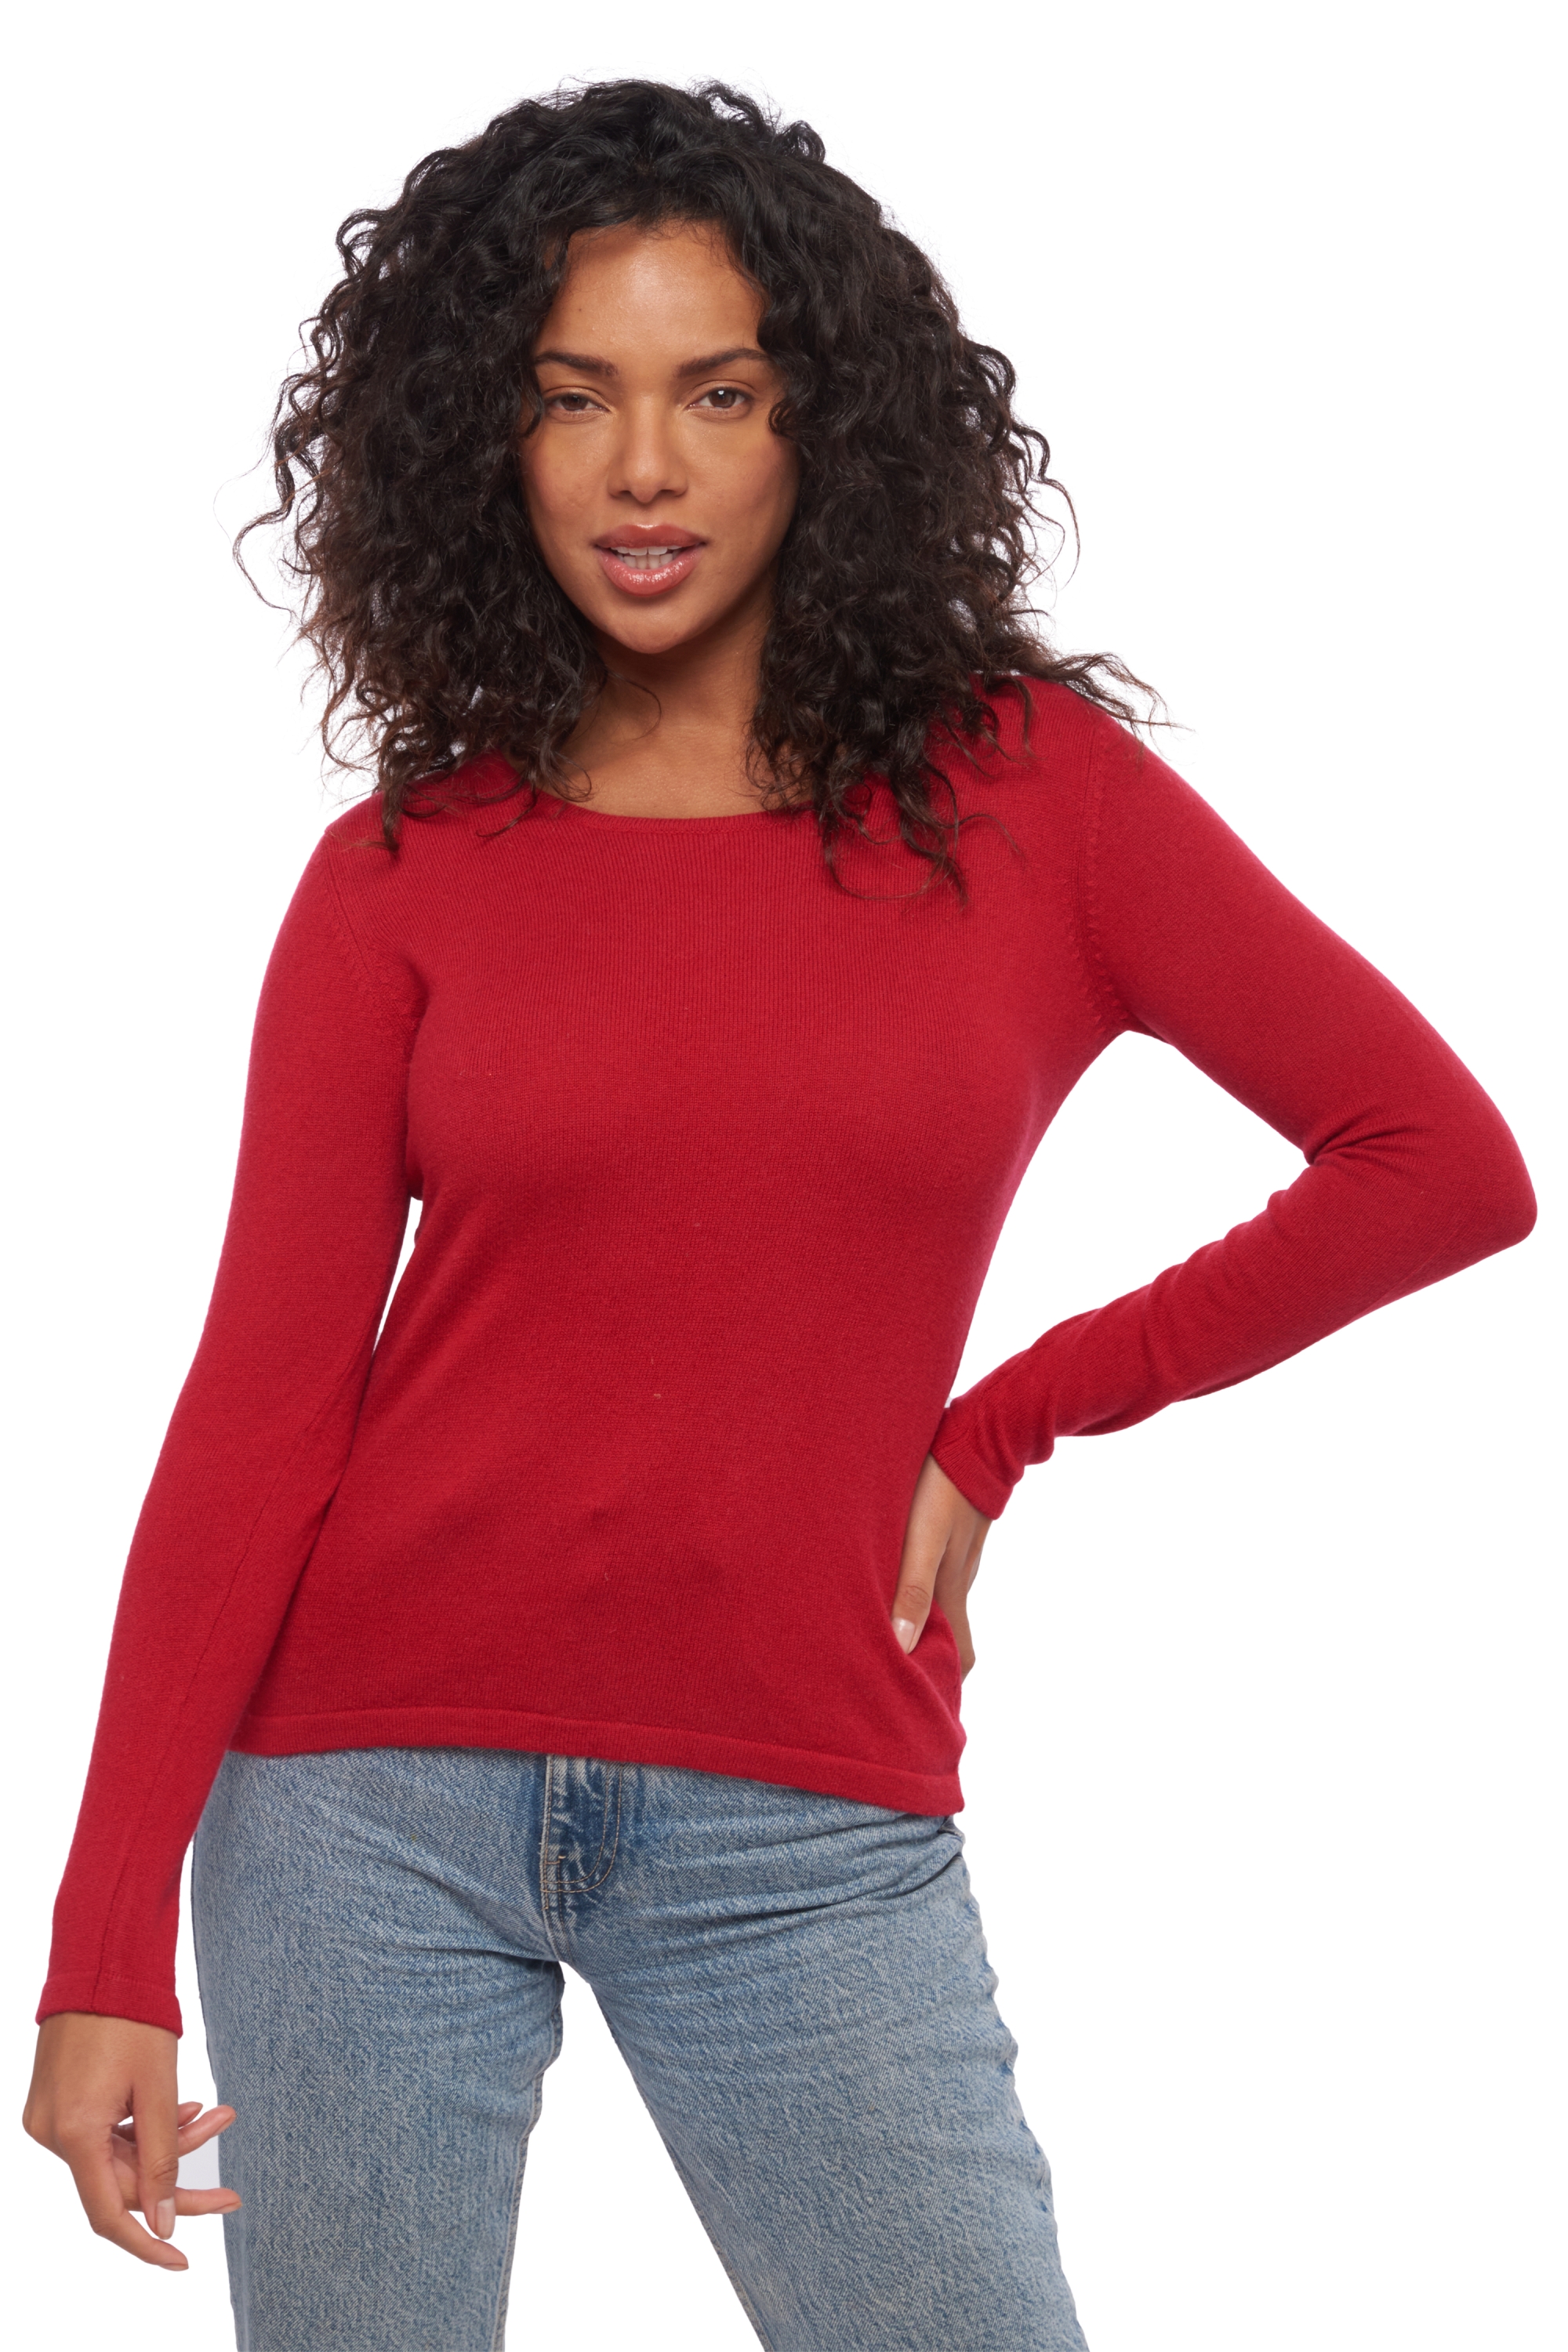 Cashmere ladies timeless classics solange blood red 4xl